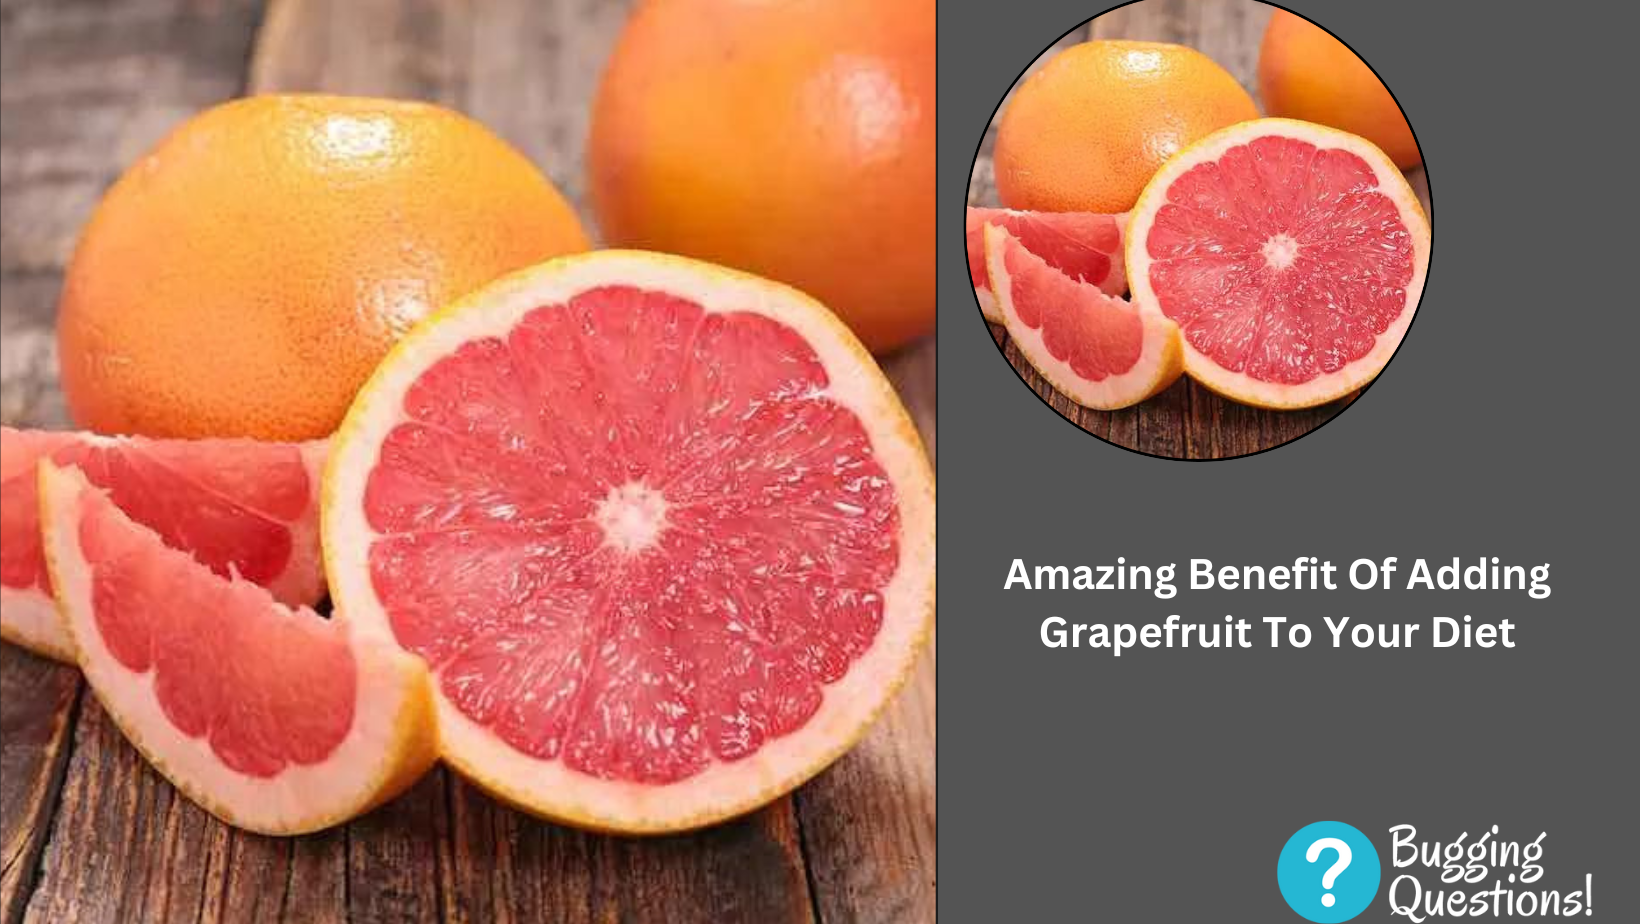 Amazing Benefit Of Adding Grapefruit To Your Diet